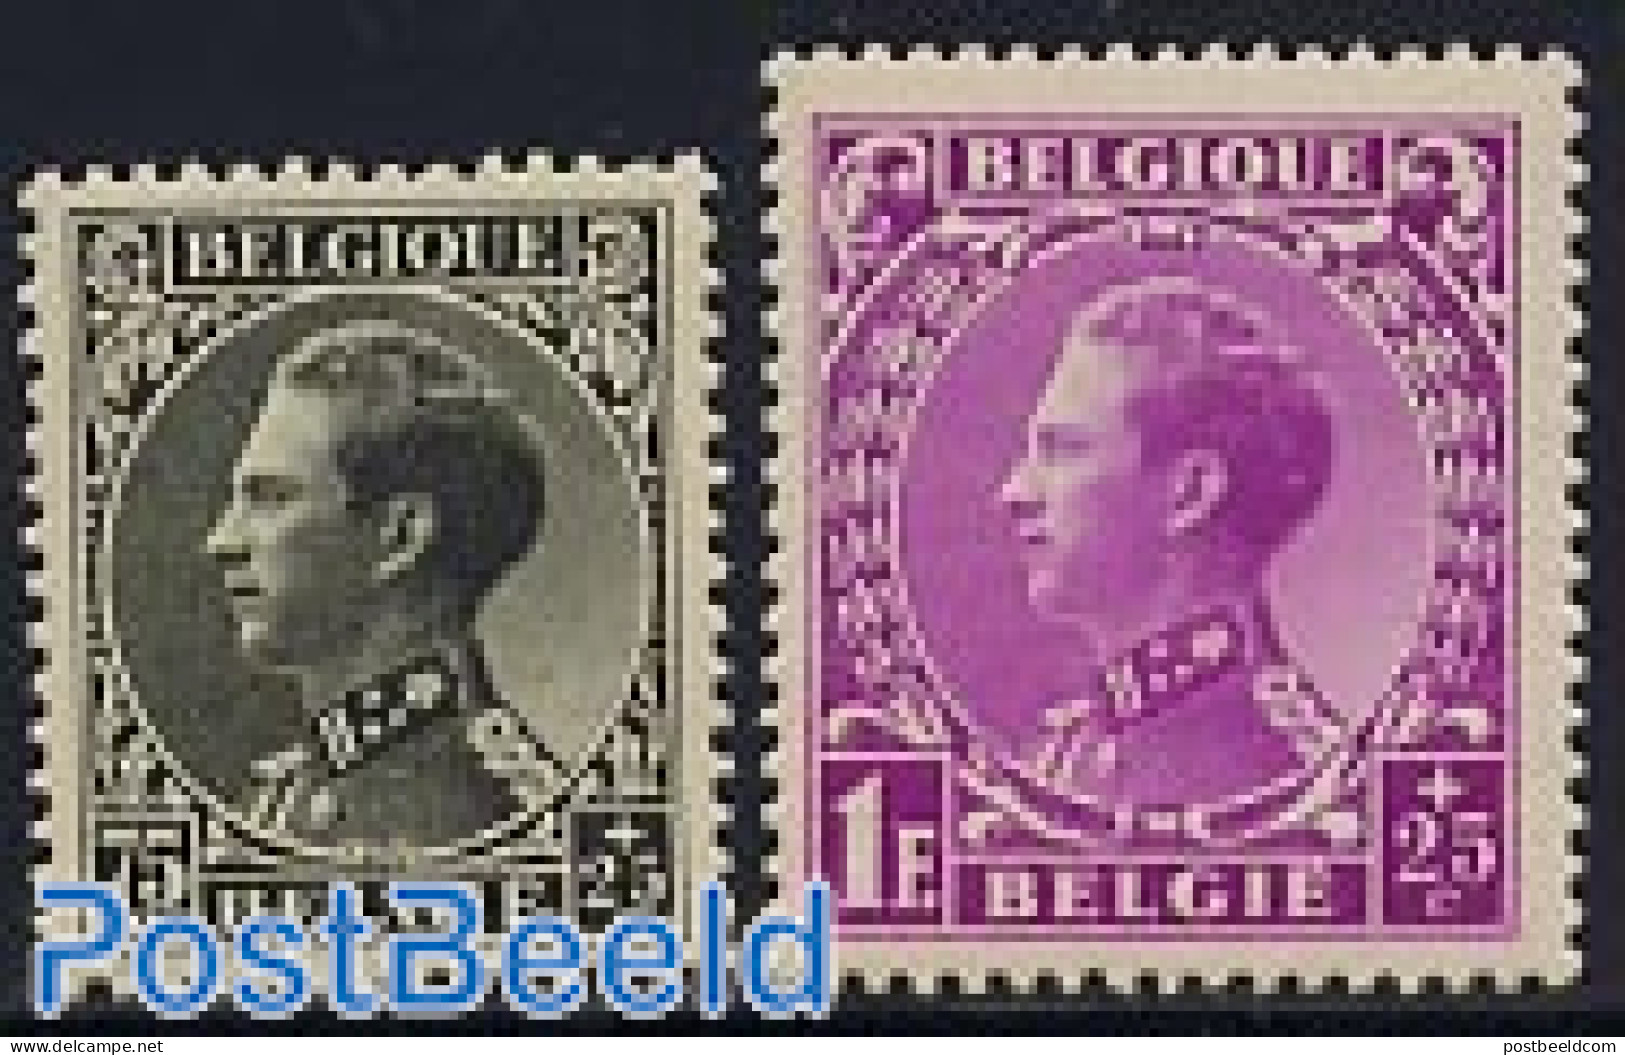 Belgium 1934 War Disabled 2v, Unused (hinged), Health - History - Disabled Persons - World War I - Nuovi